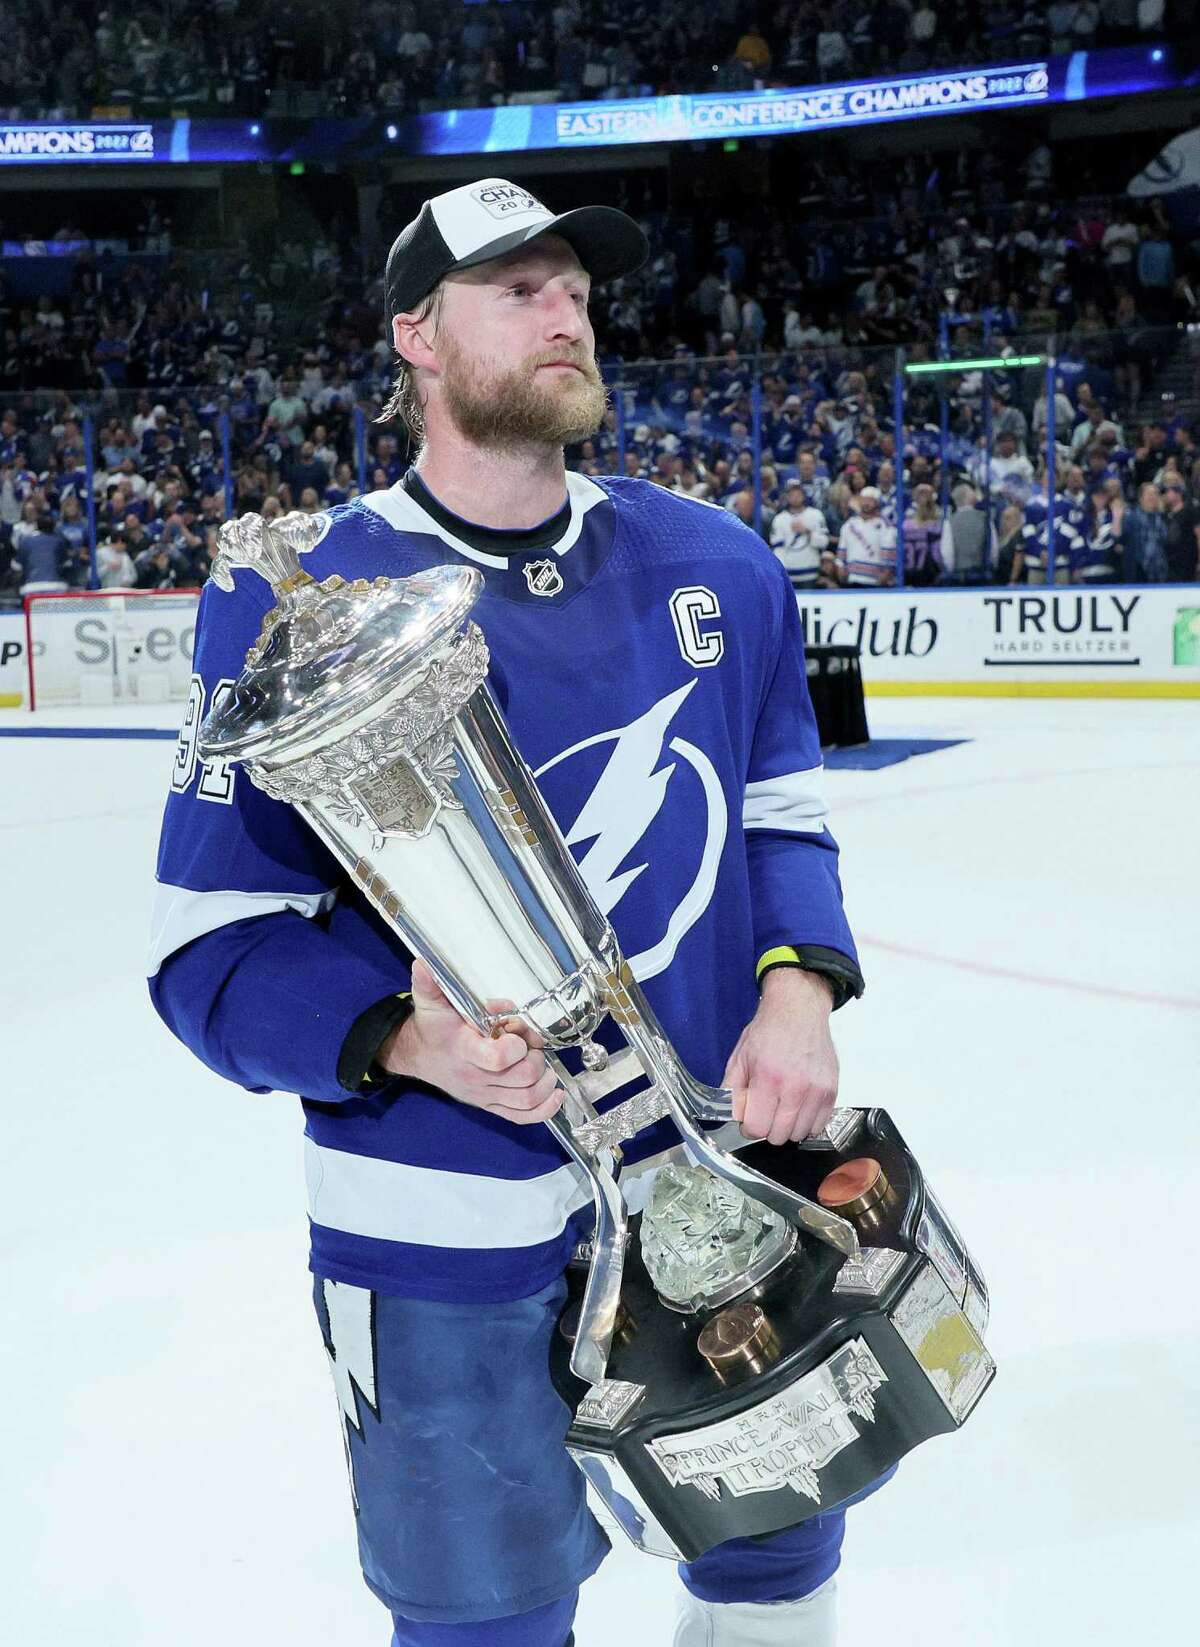 Steven Stamkos and the two-time defending champion Lightning face the Avalanche in Colorado in Game 1 of the Stanley Cup Finals at 5 p.m. Wednesday (Channel 7, Channel 10).